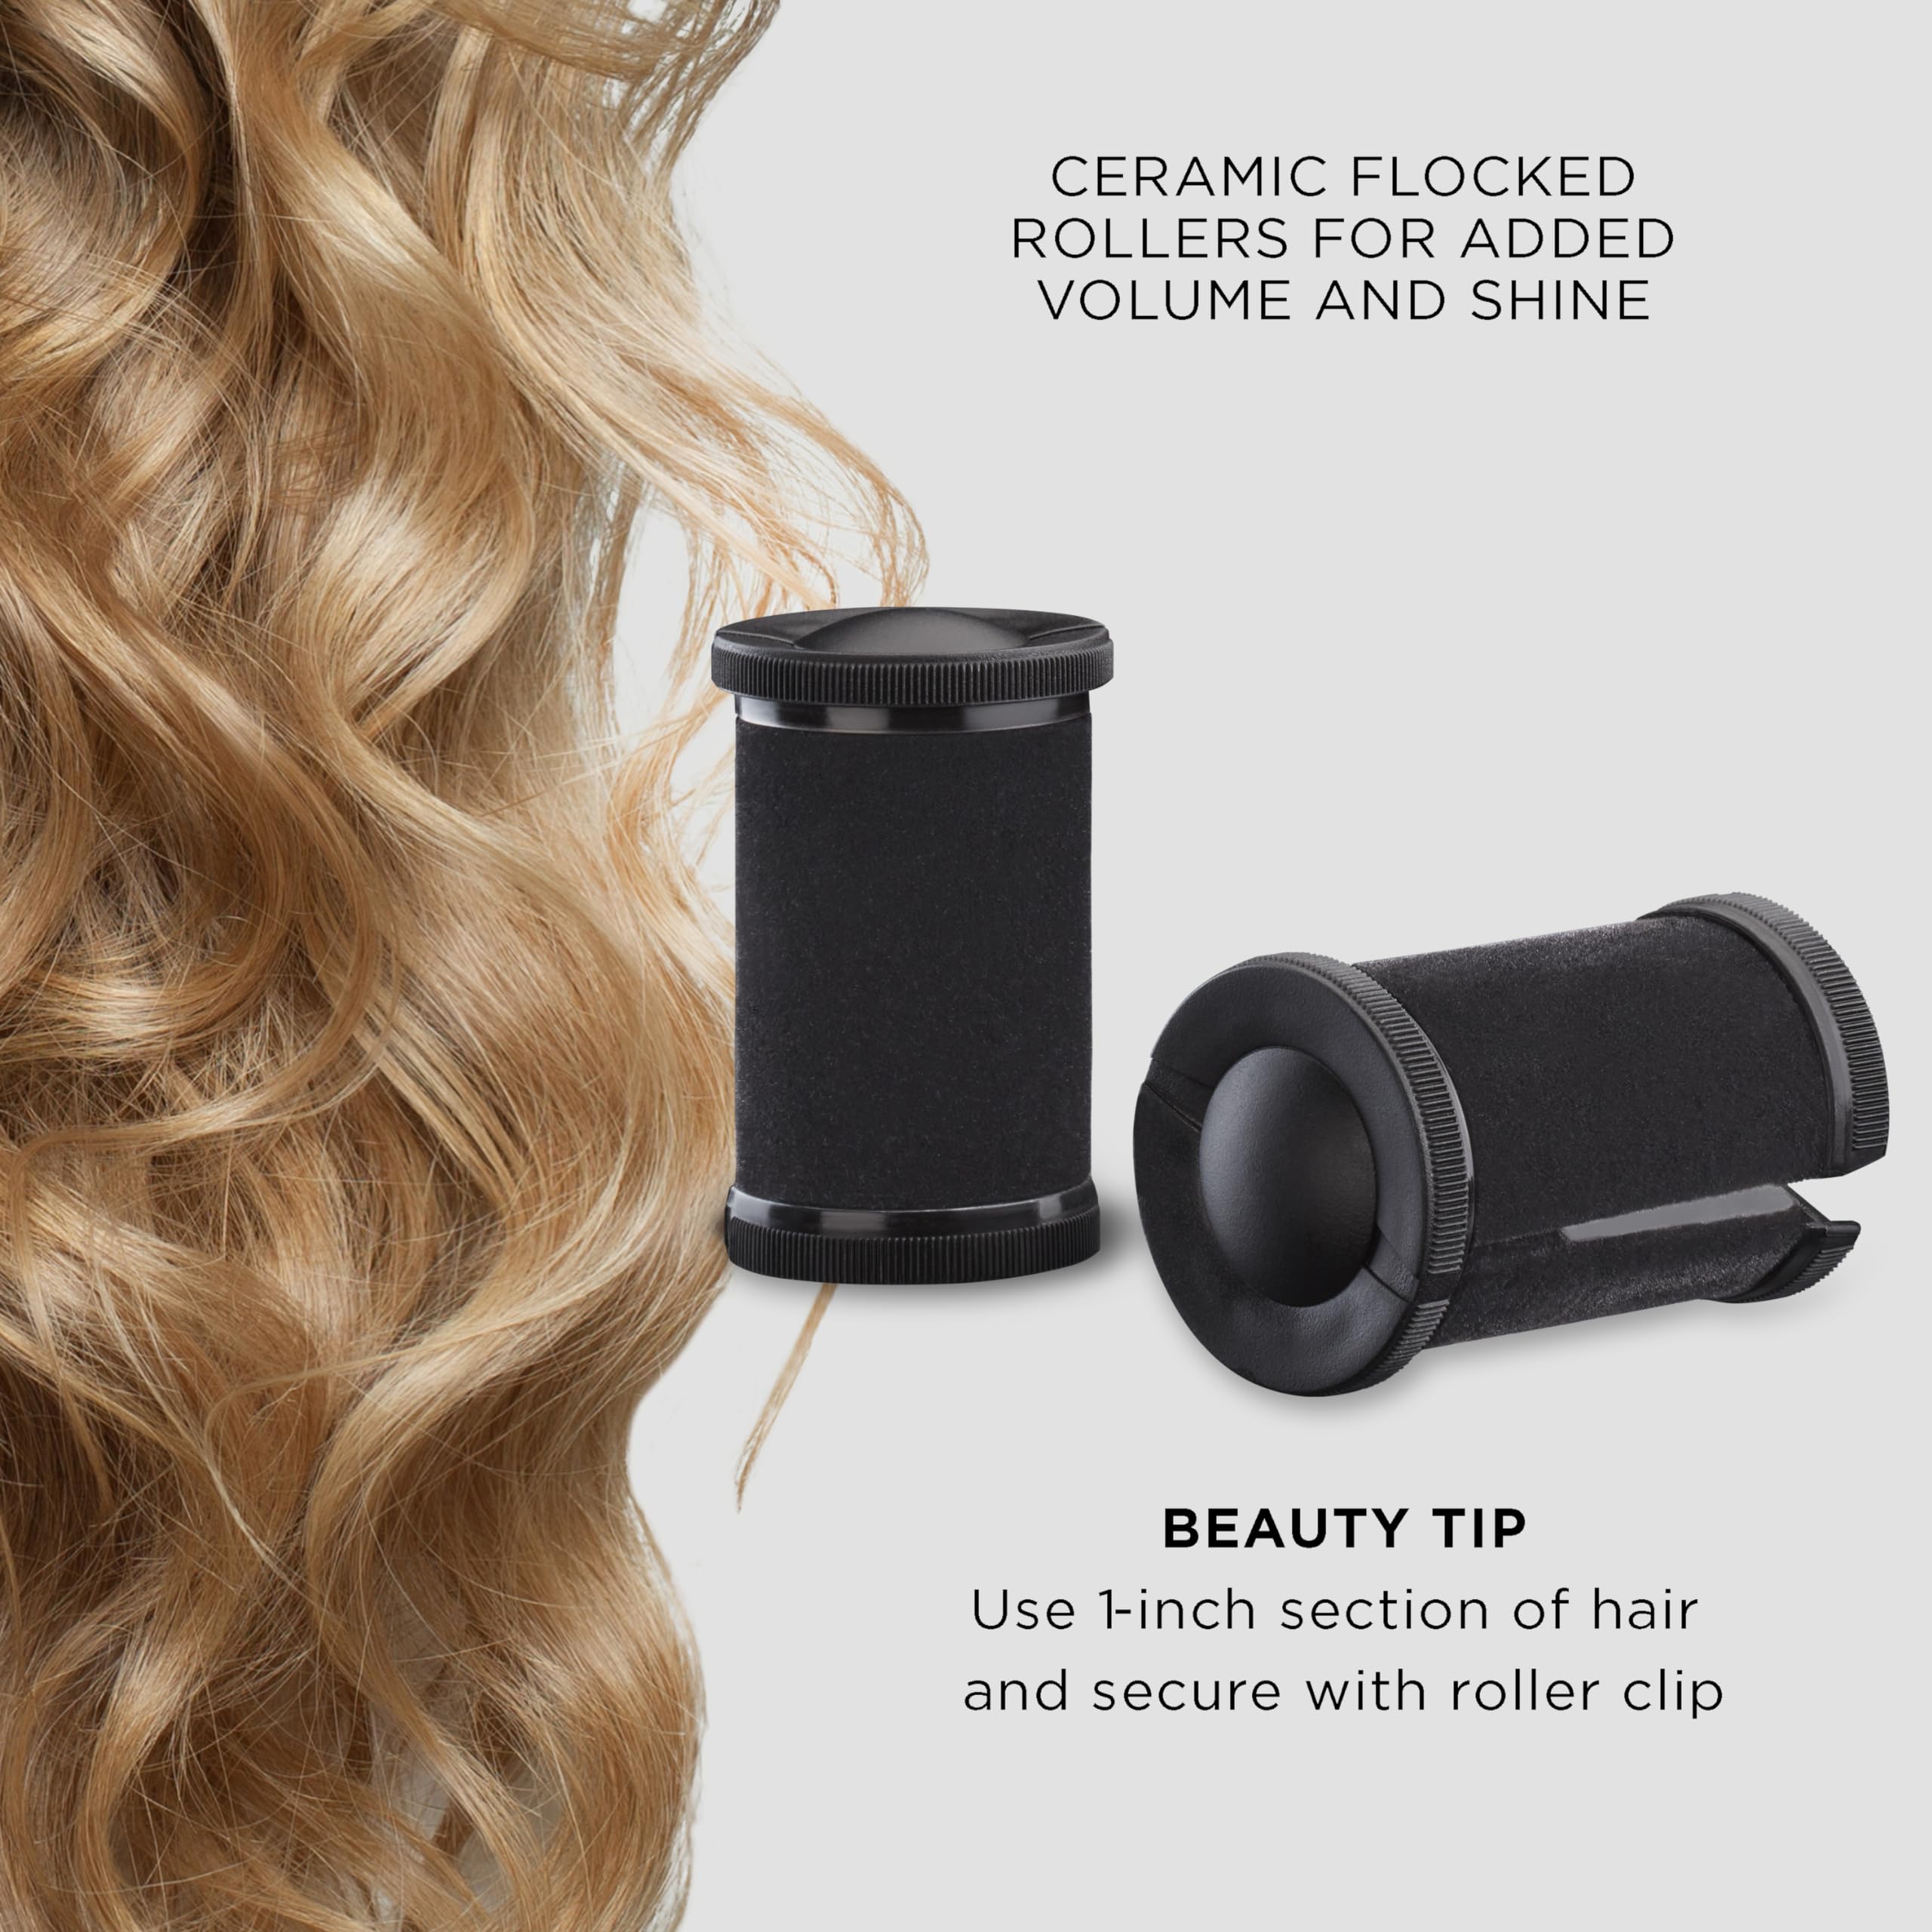 Conair Ceramic 1 1/2-inch Hot Rollers, Super Clips Included, Create Big Bouncy Curls, Black - Amazon Exclusive